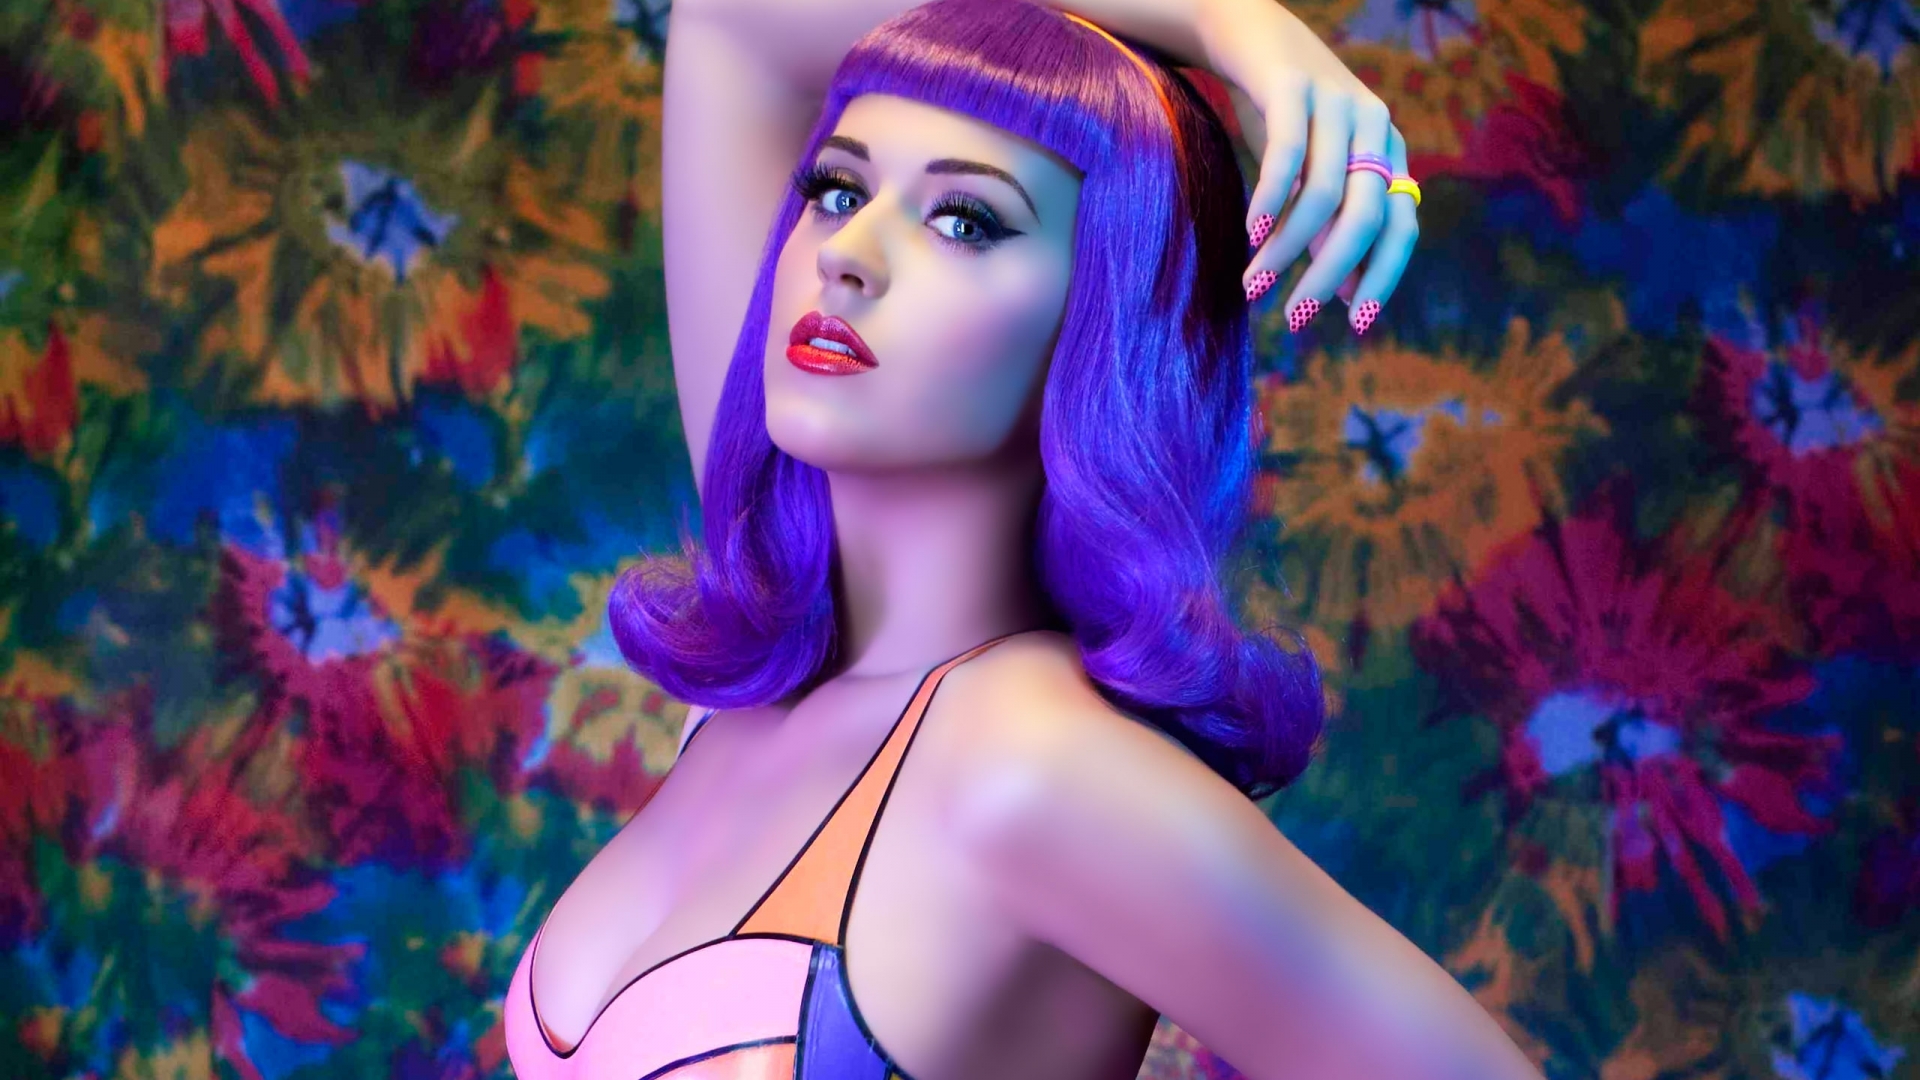 Colourful Katy Perry for 1920 x 1080 HDTV 1080p resolution